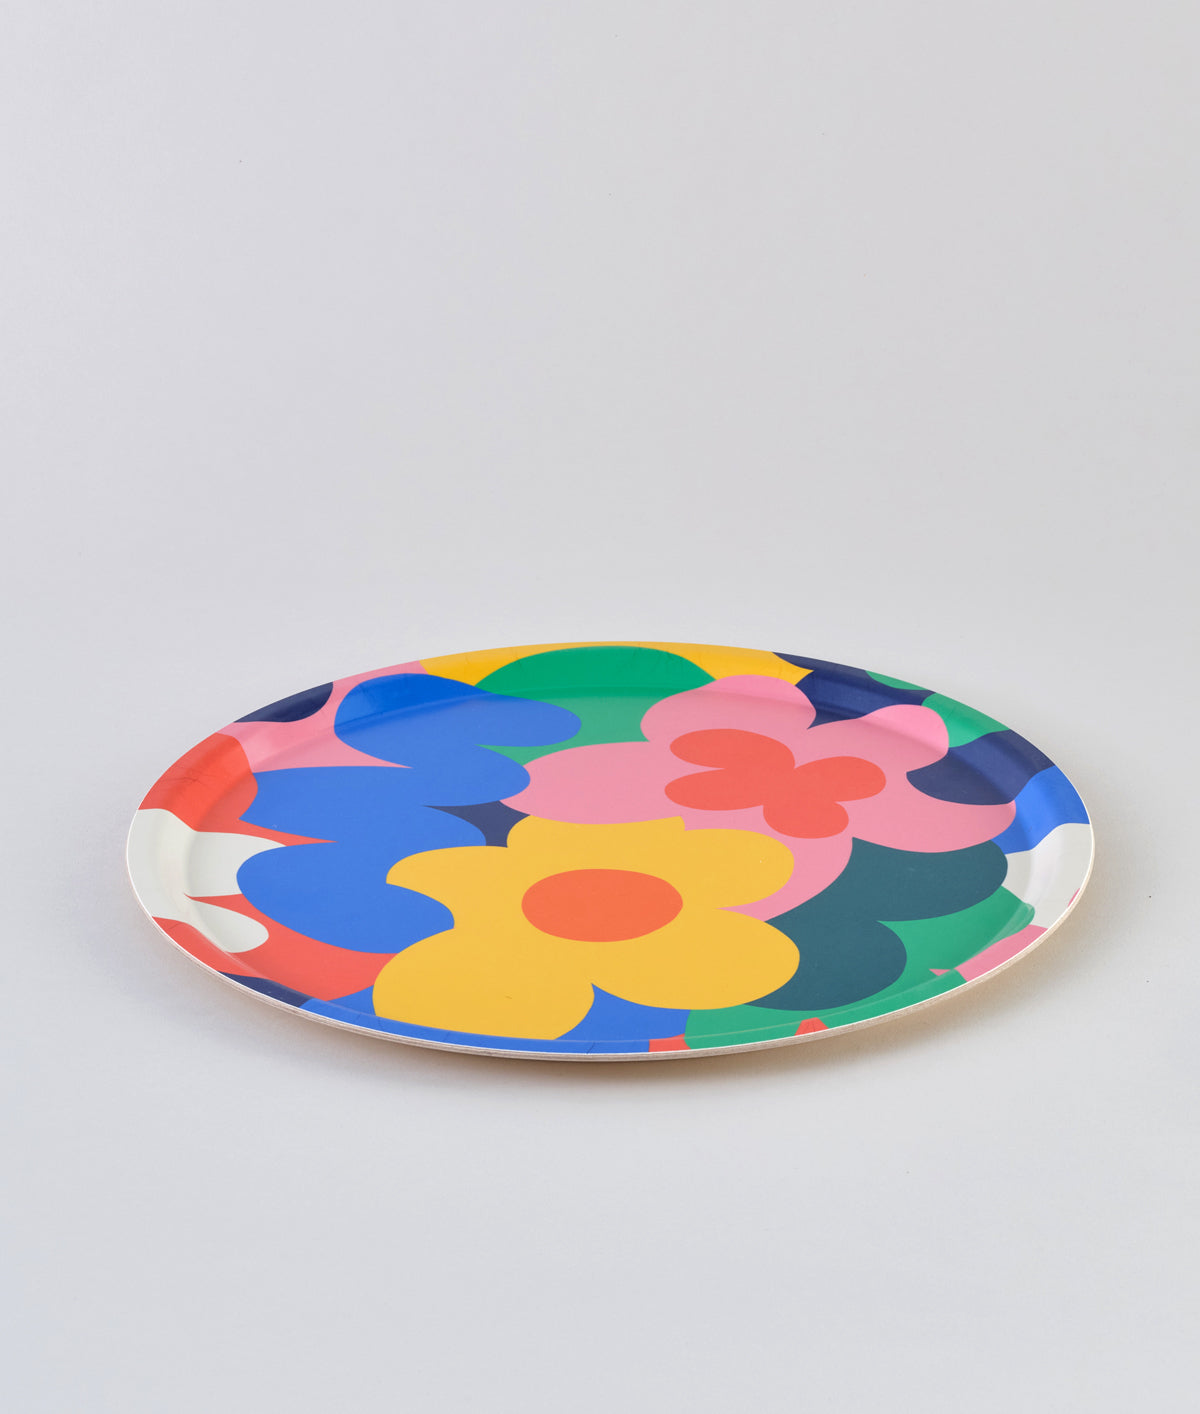 The Every Space large colourful Floral Abstract Tray designed by Micke Lindebergh for Wrap